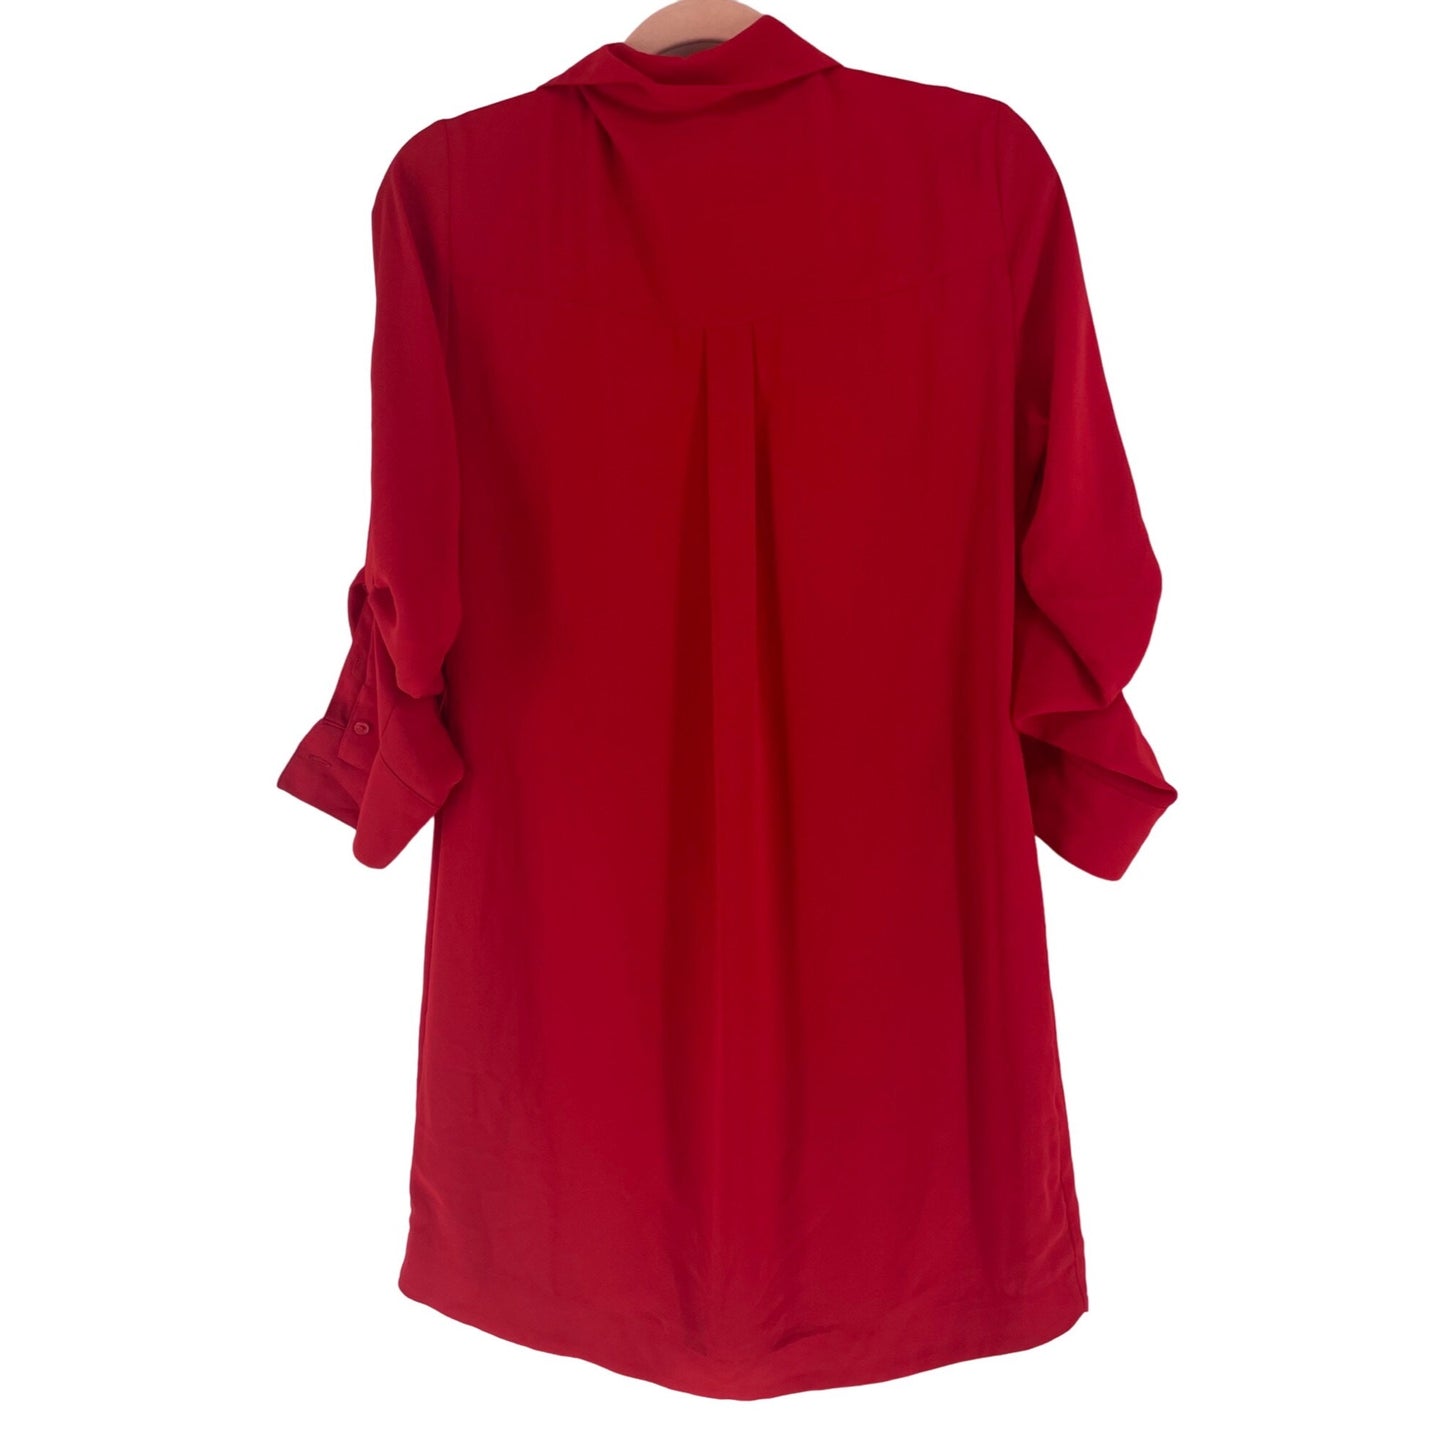 Express Women's Size Small Red Long-Sleeved Button-Down Midi Dress